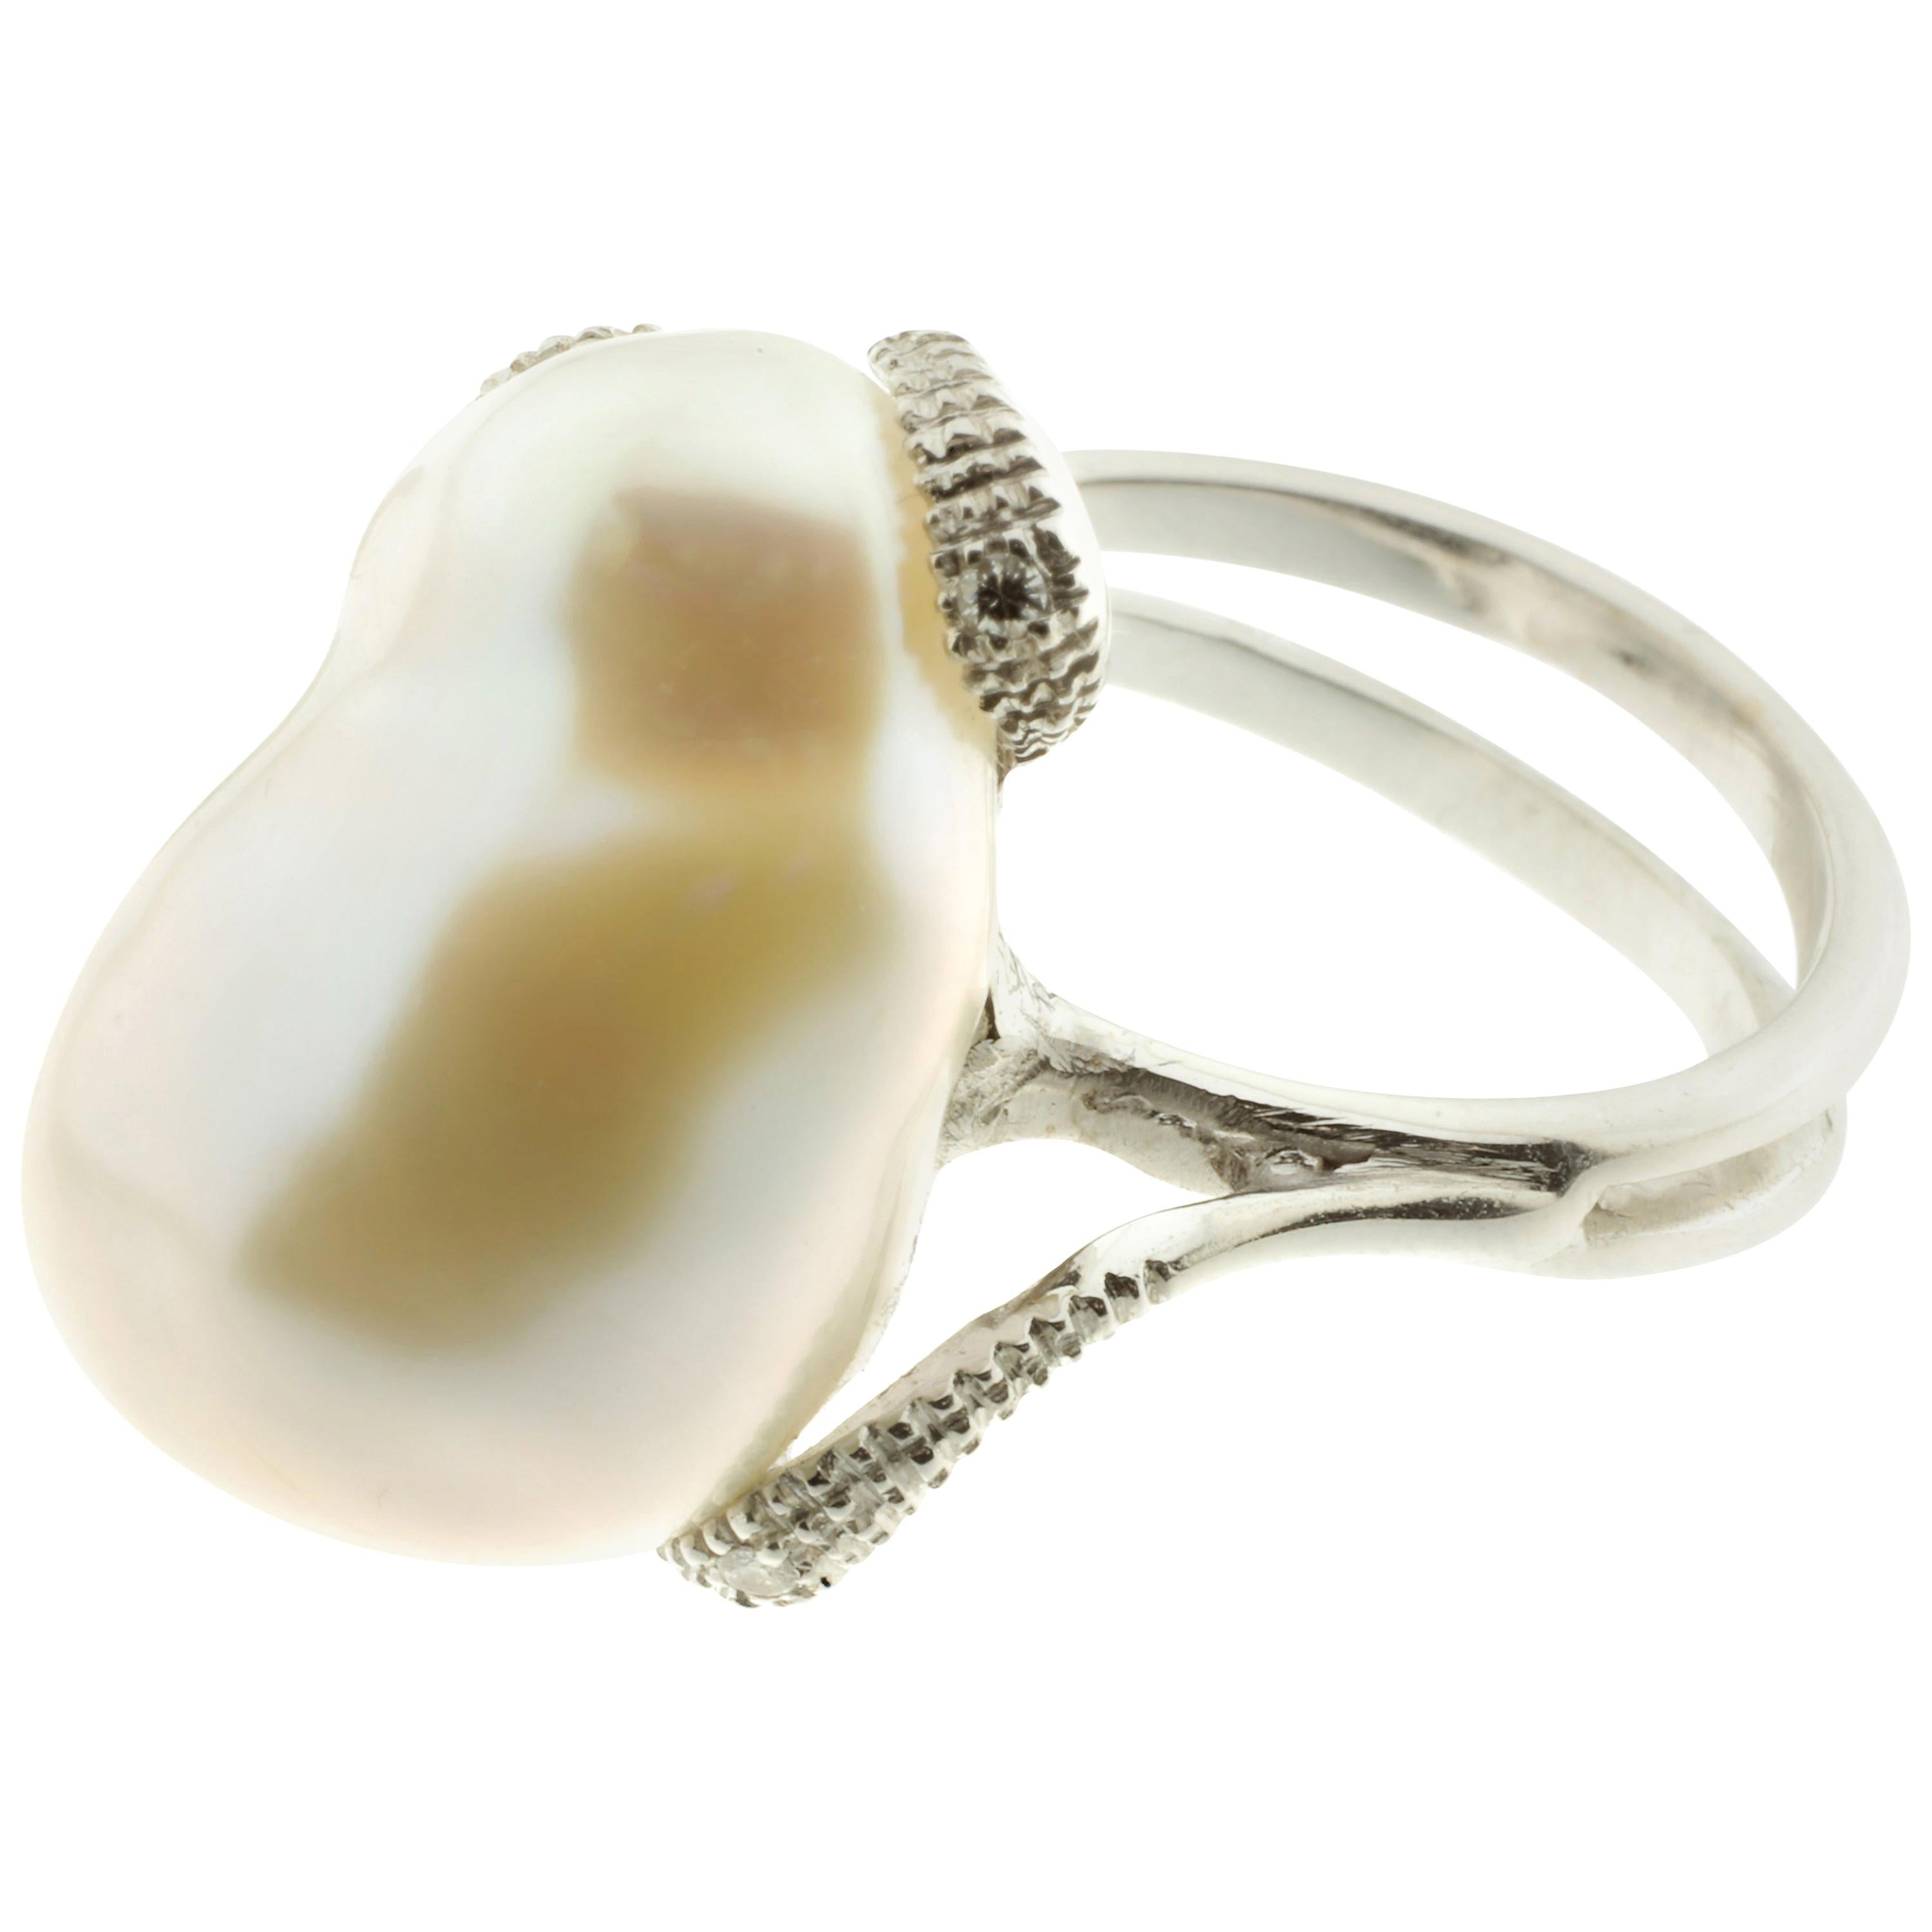 This stunning double band cocktail ring has been masterfully created entirely by hand from 18-karat white gold and features a large cultured pearl, positioned lengthwise, set with white diamonds. 

Measuring about 21.5 millimetres (along the